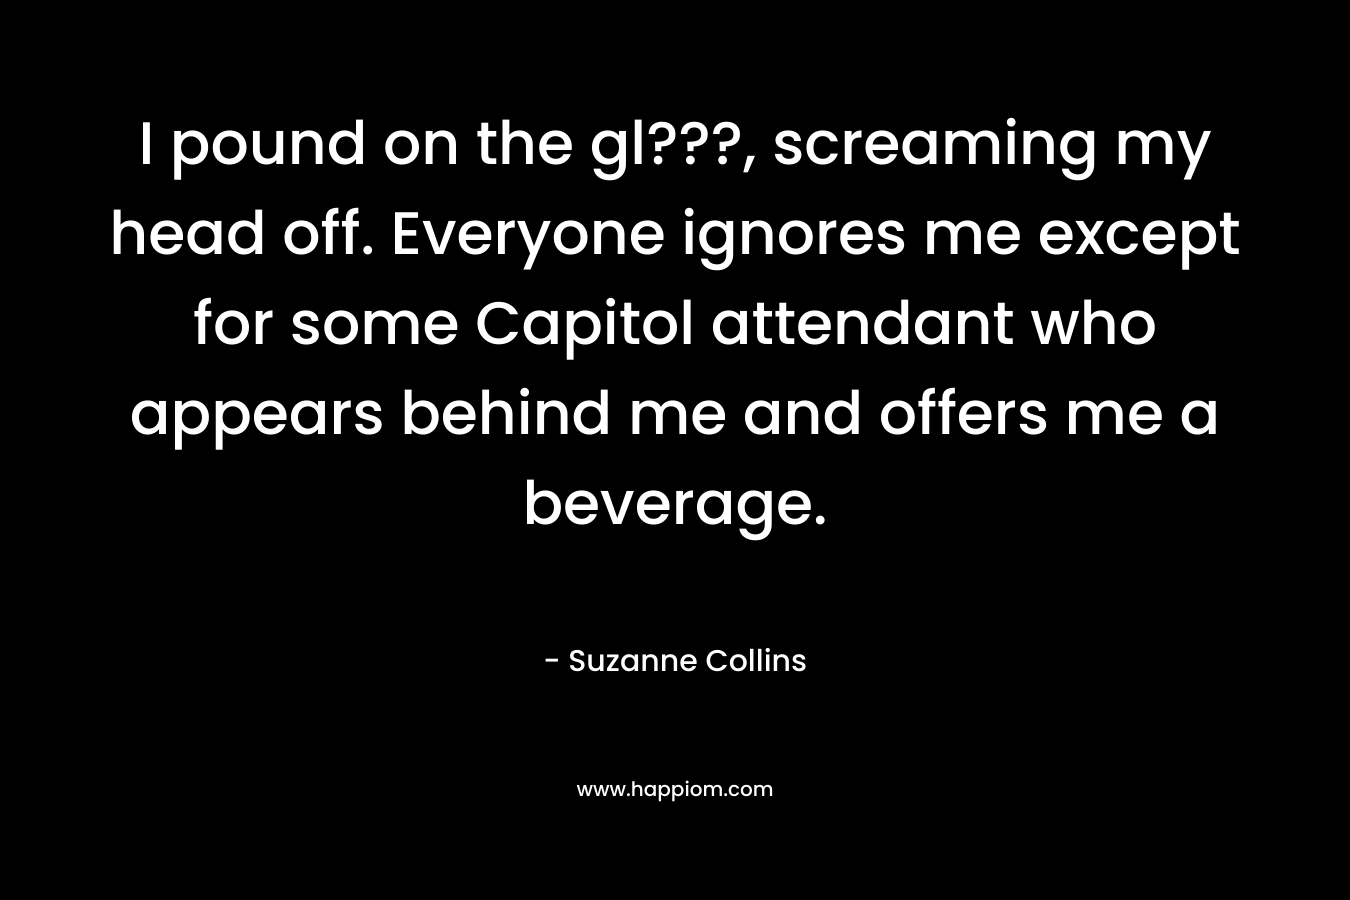 I pound on the gl???, screaming my head off. Everyone ignores me except for some Capitol attendant who appears behind me and offers me a beverage. – Suzanne Collins